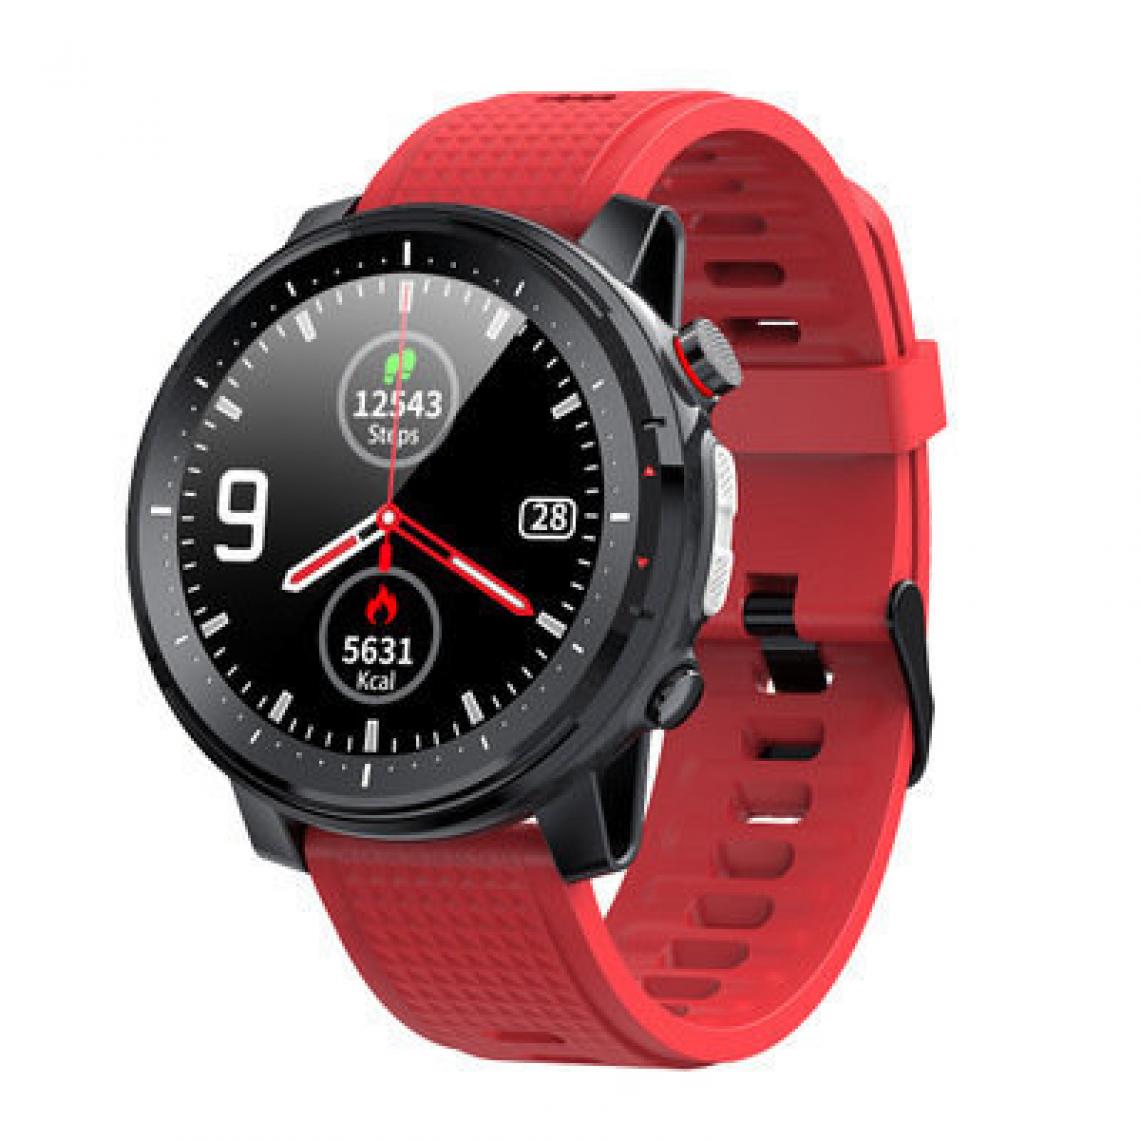 Chronotech Montres - Smart Watch Blood Pressure Monitor Blood Oxygen Meter Heart Rate Monitor Waterproof IP68(Red) - Montre connectée